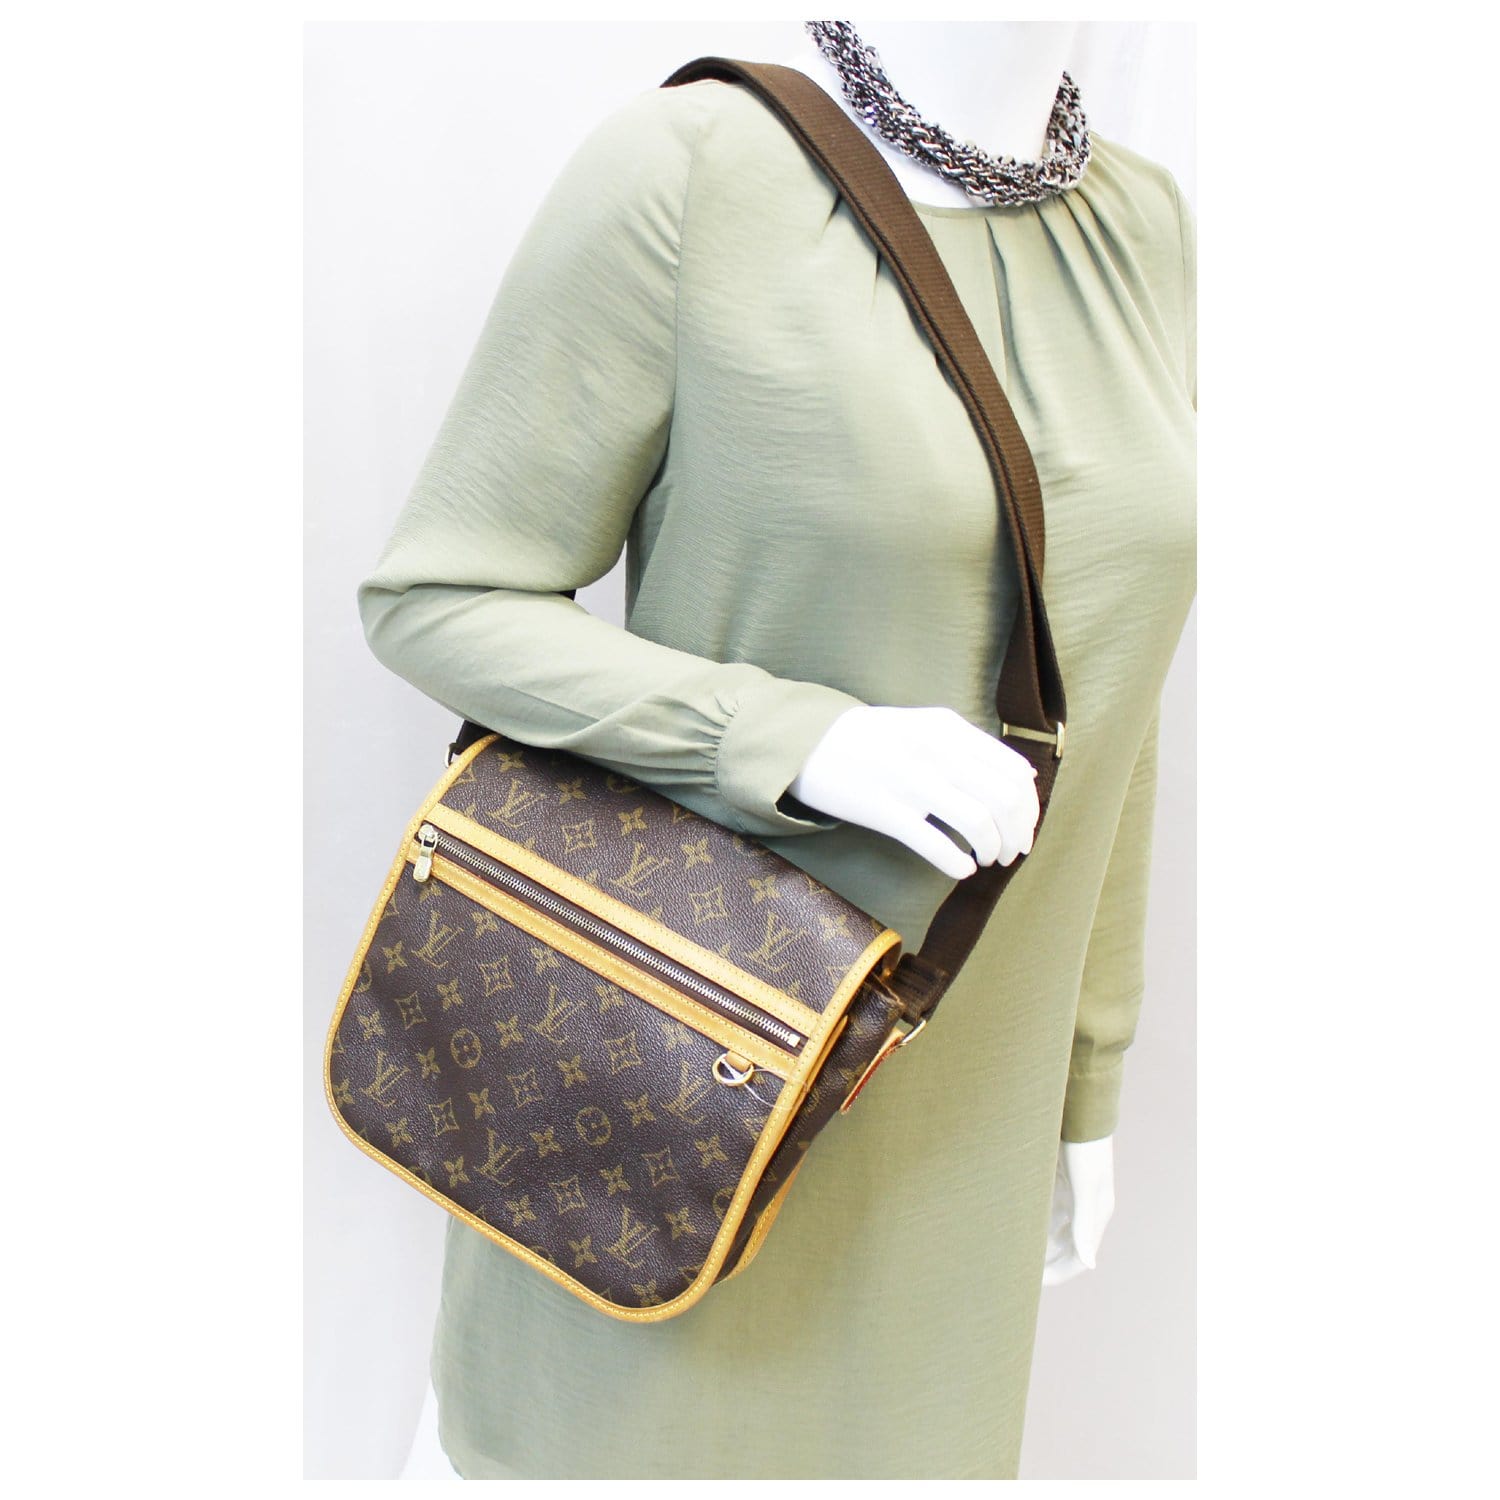 Shop for Louis Vuitton Monogram Canvas Leather Bosphore Messenger PM  Handbag - Shipped from USA